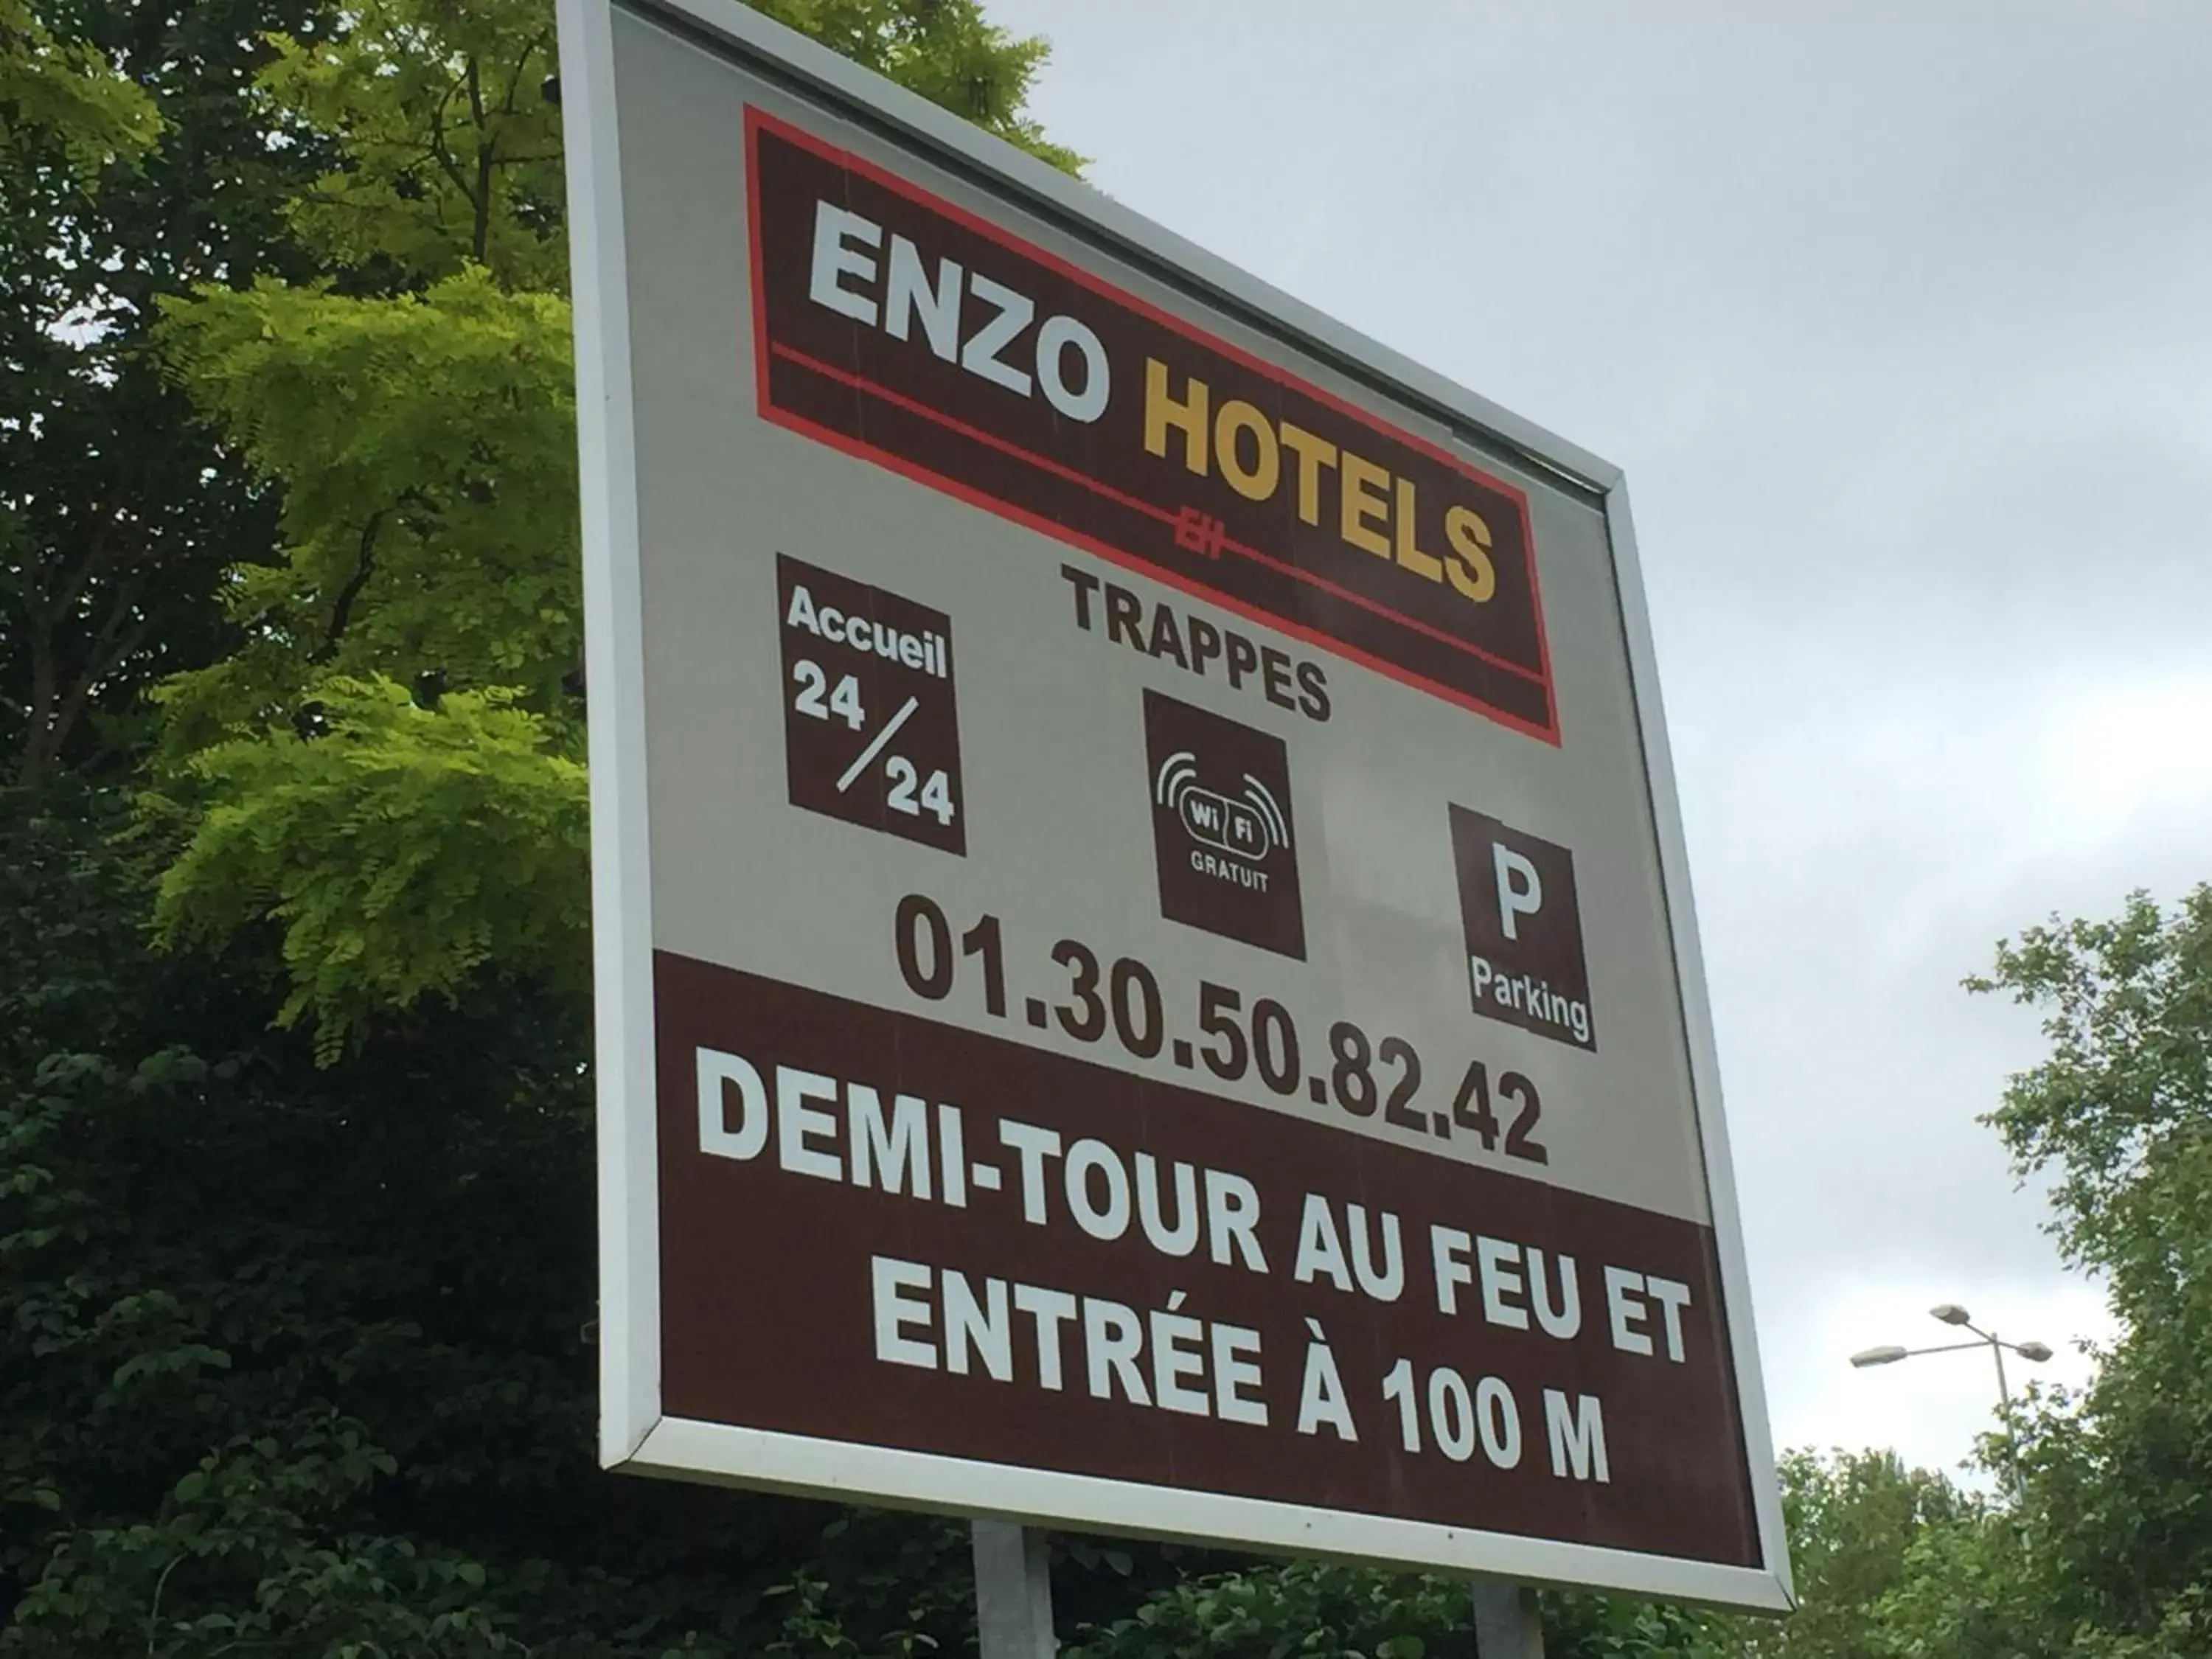 Other in Enzo Hotels Trappes by Kyriad Direct